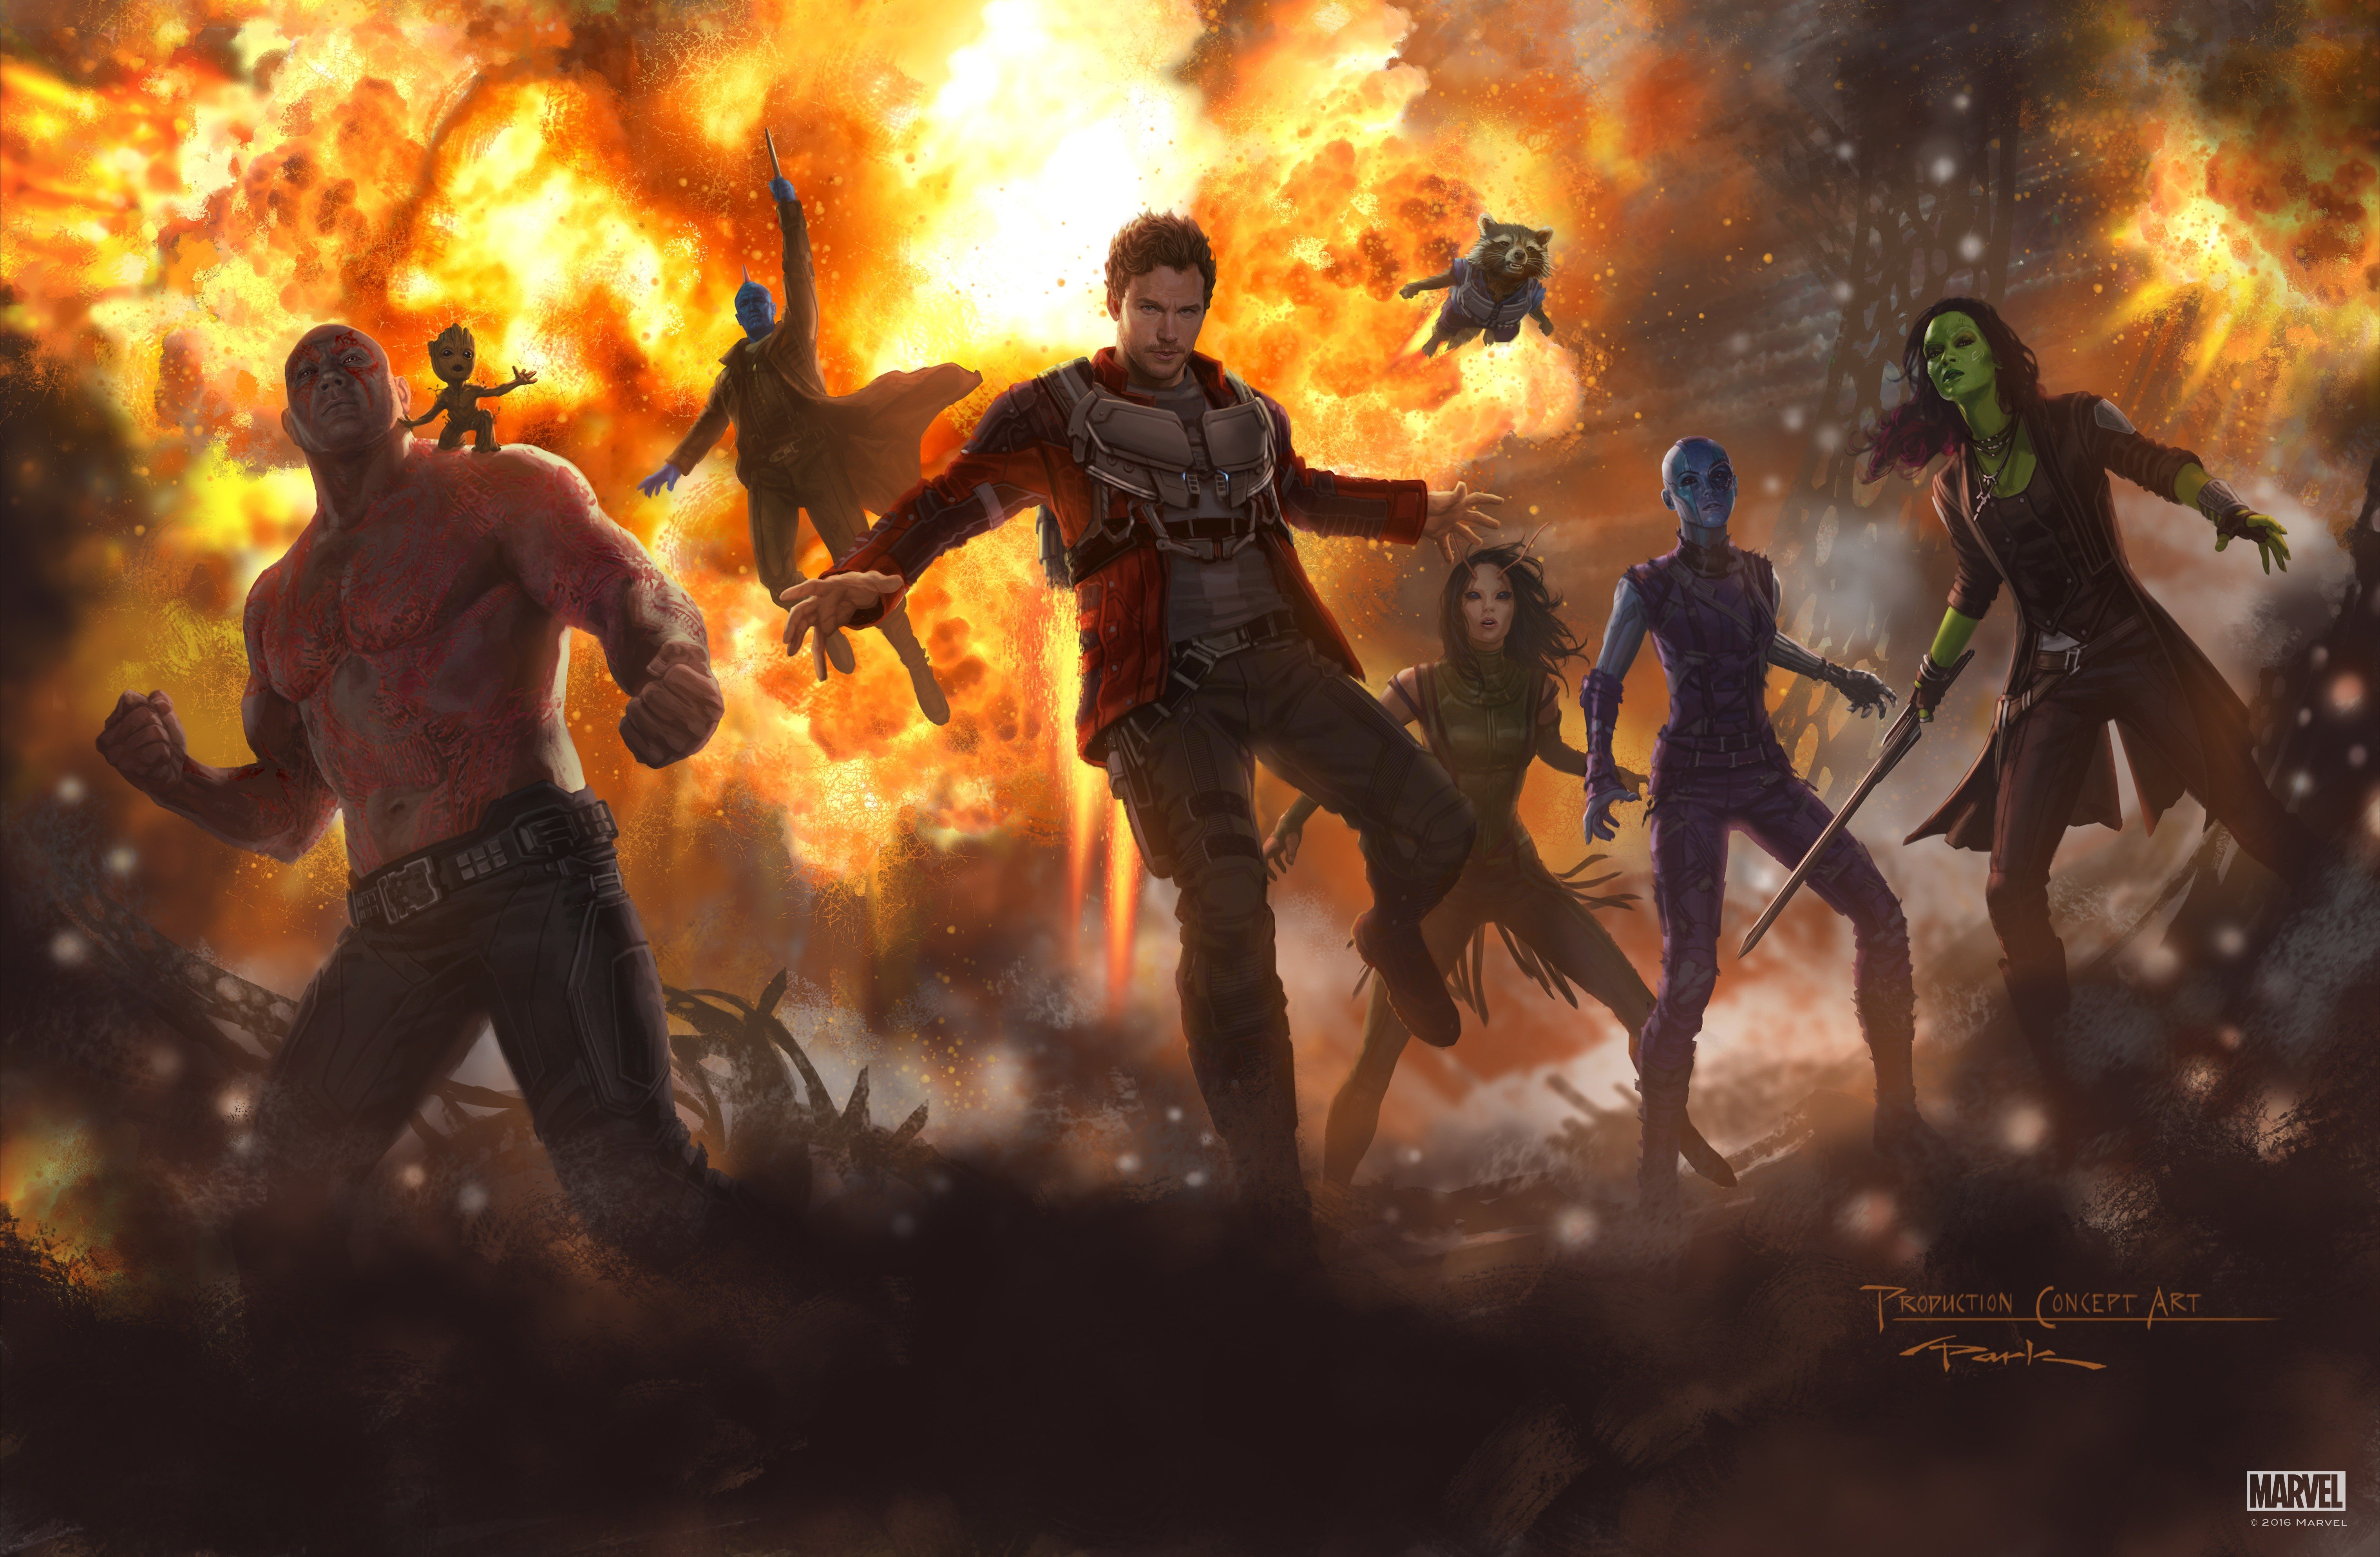 Andy Park, Gamora, Drax the Destroyer, Star Lord, Rocket Raccoon, Baby Groot, Yondu Udonta, Guardians of the Galaxy Vol. 2, Artwork, Nebula, Mantis, Guardians of the Galaxy Wallpaper